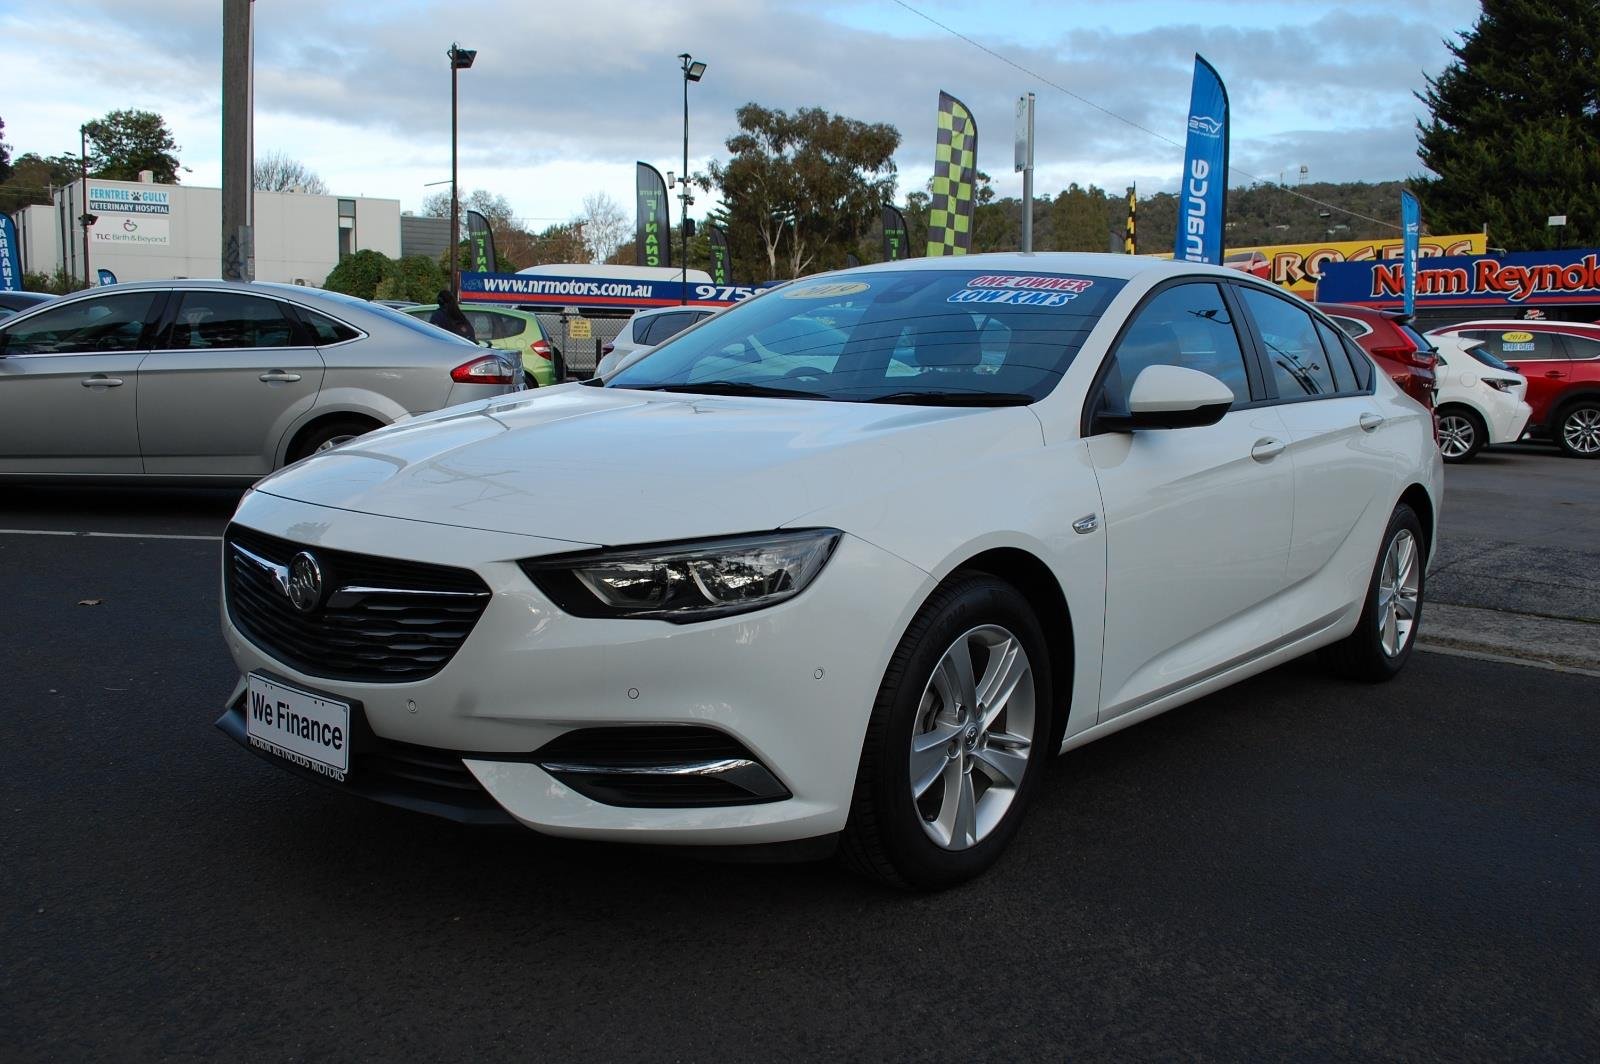 2019 Holden COMMODORE LT ZB MY19.5